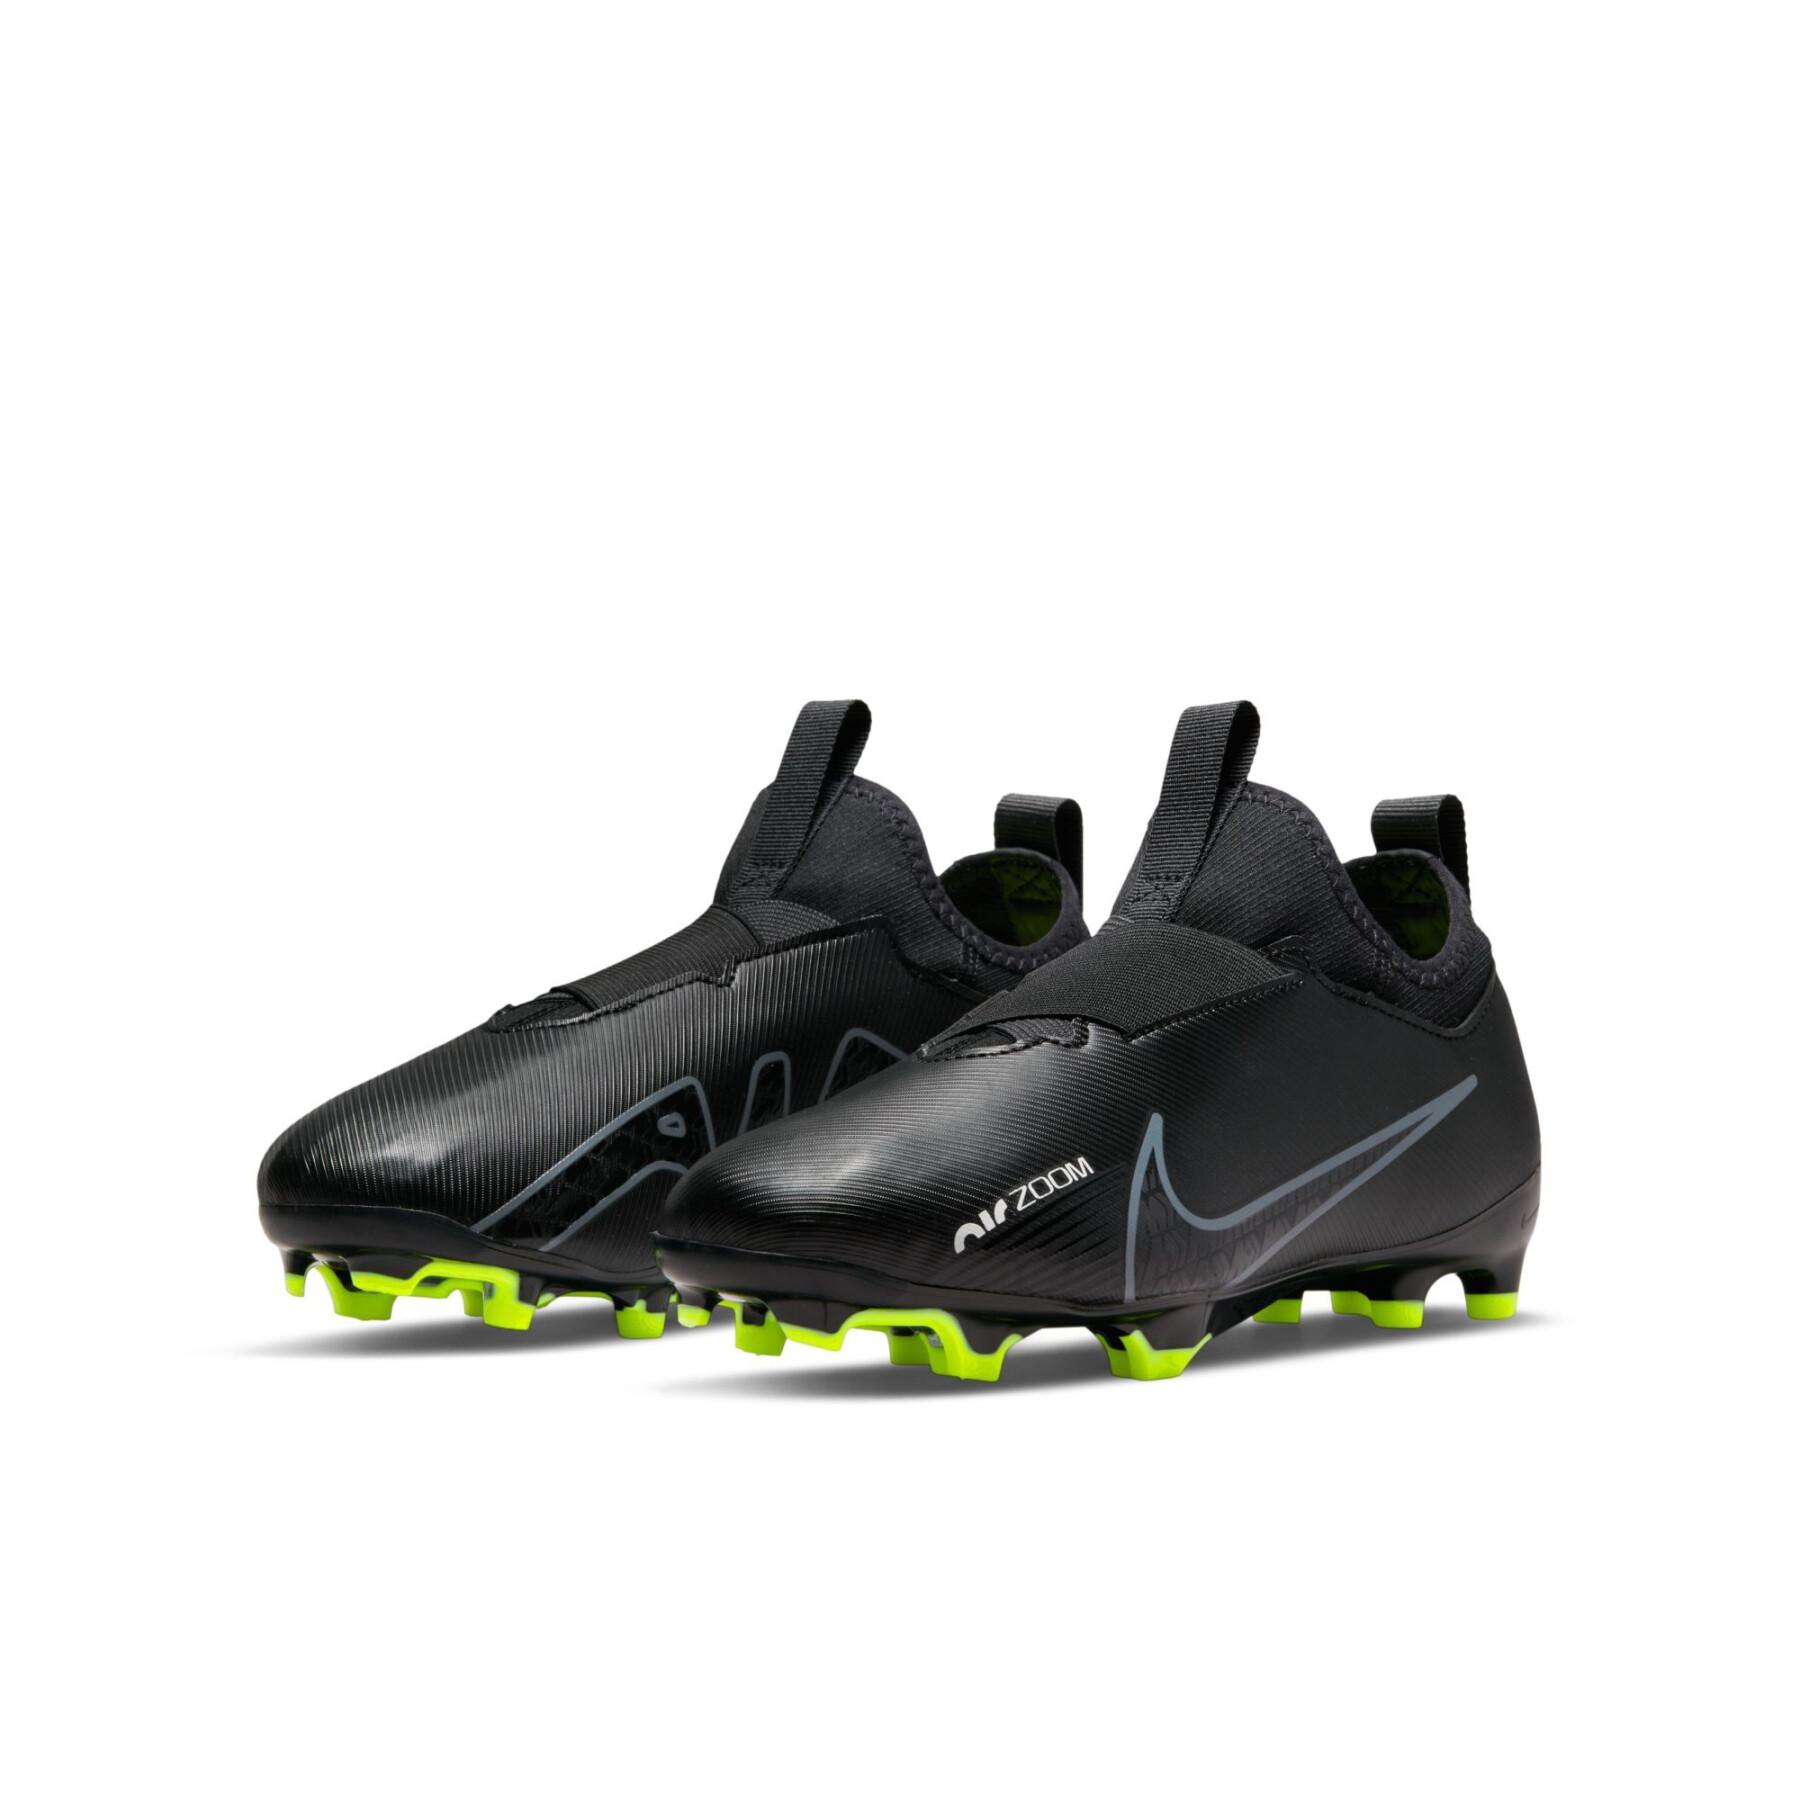 Children's soccer shoes Nike Zoom Mercurial Vapor 15 Academy MG - Shadow Black Pack